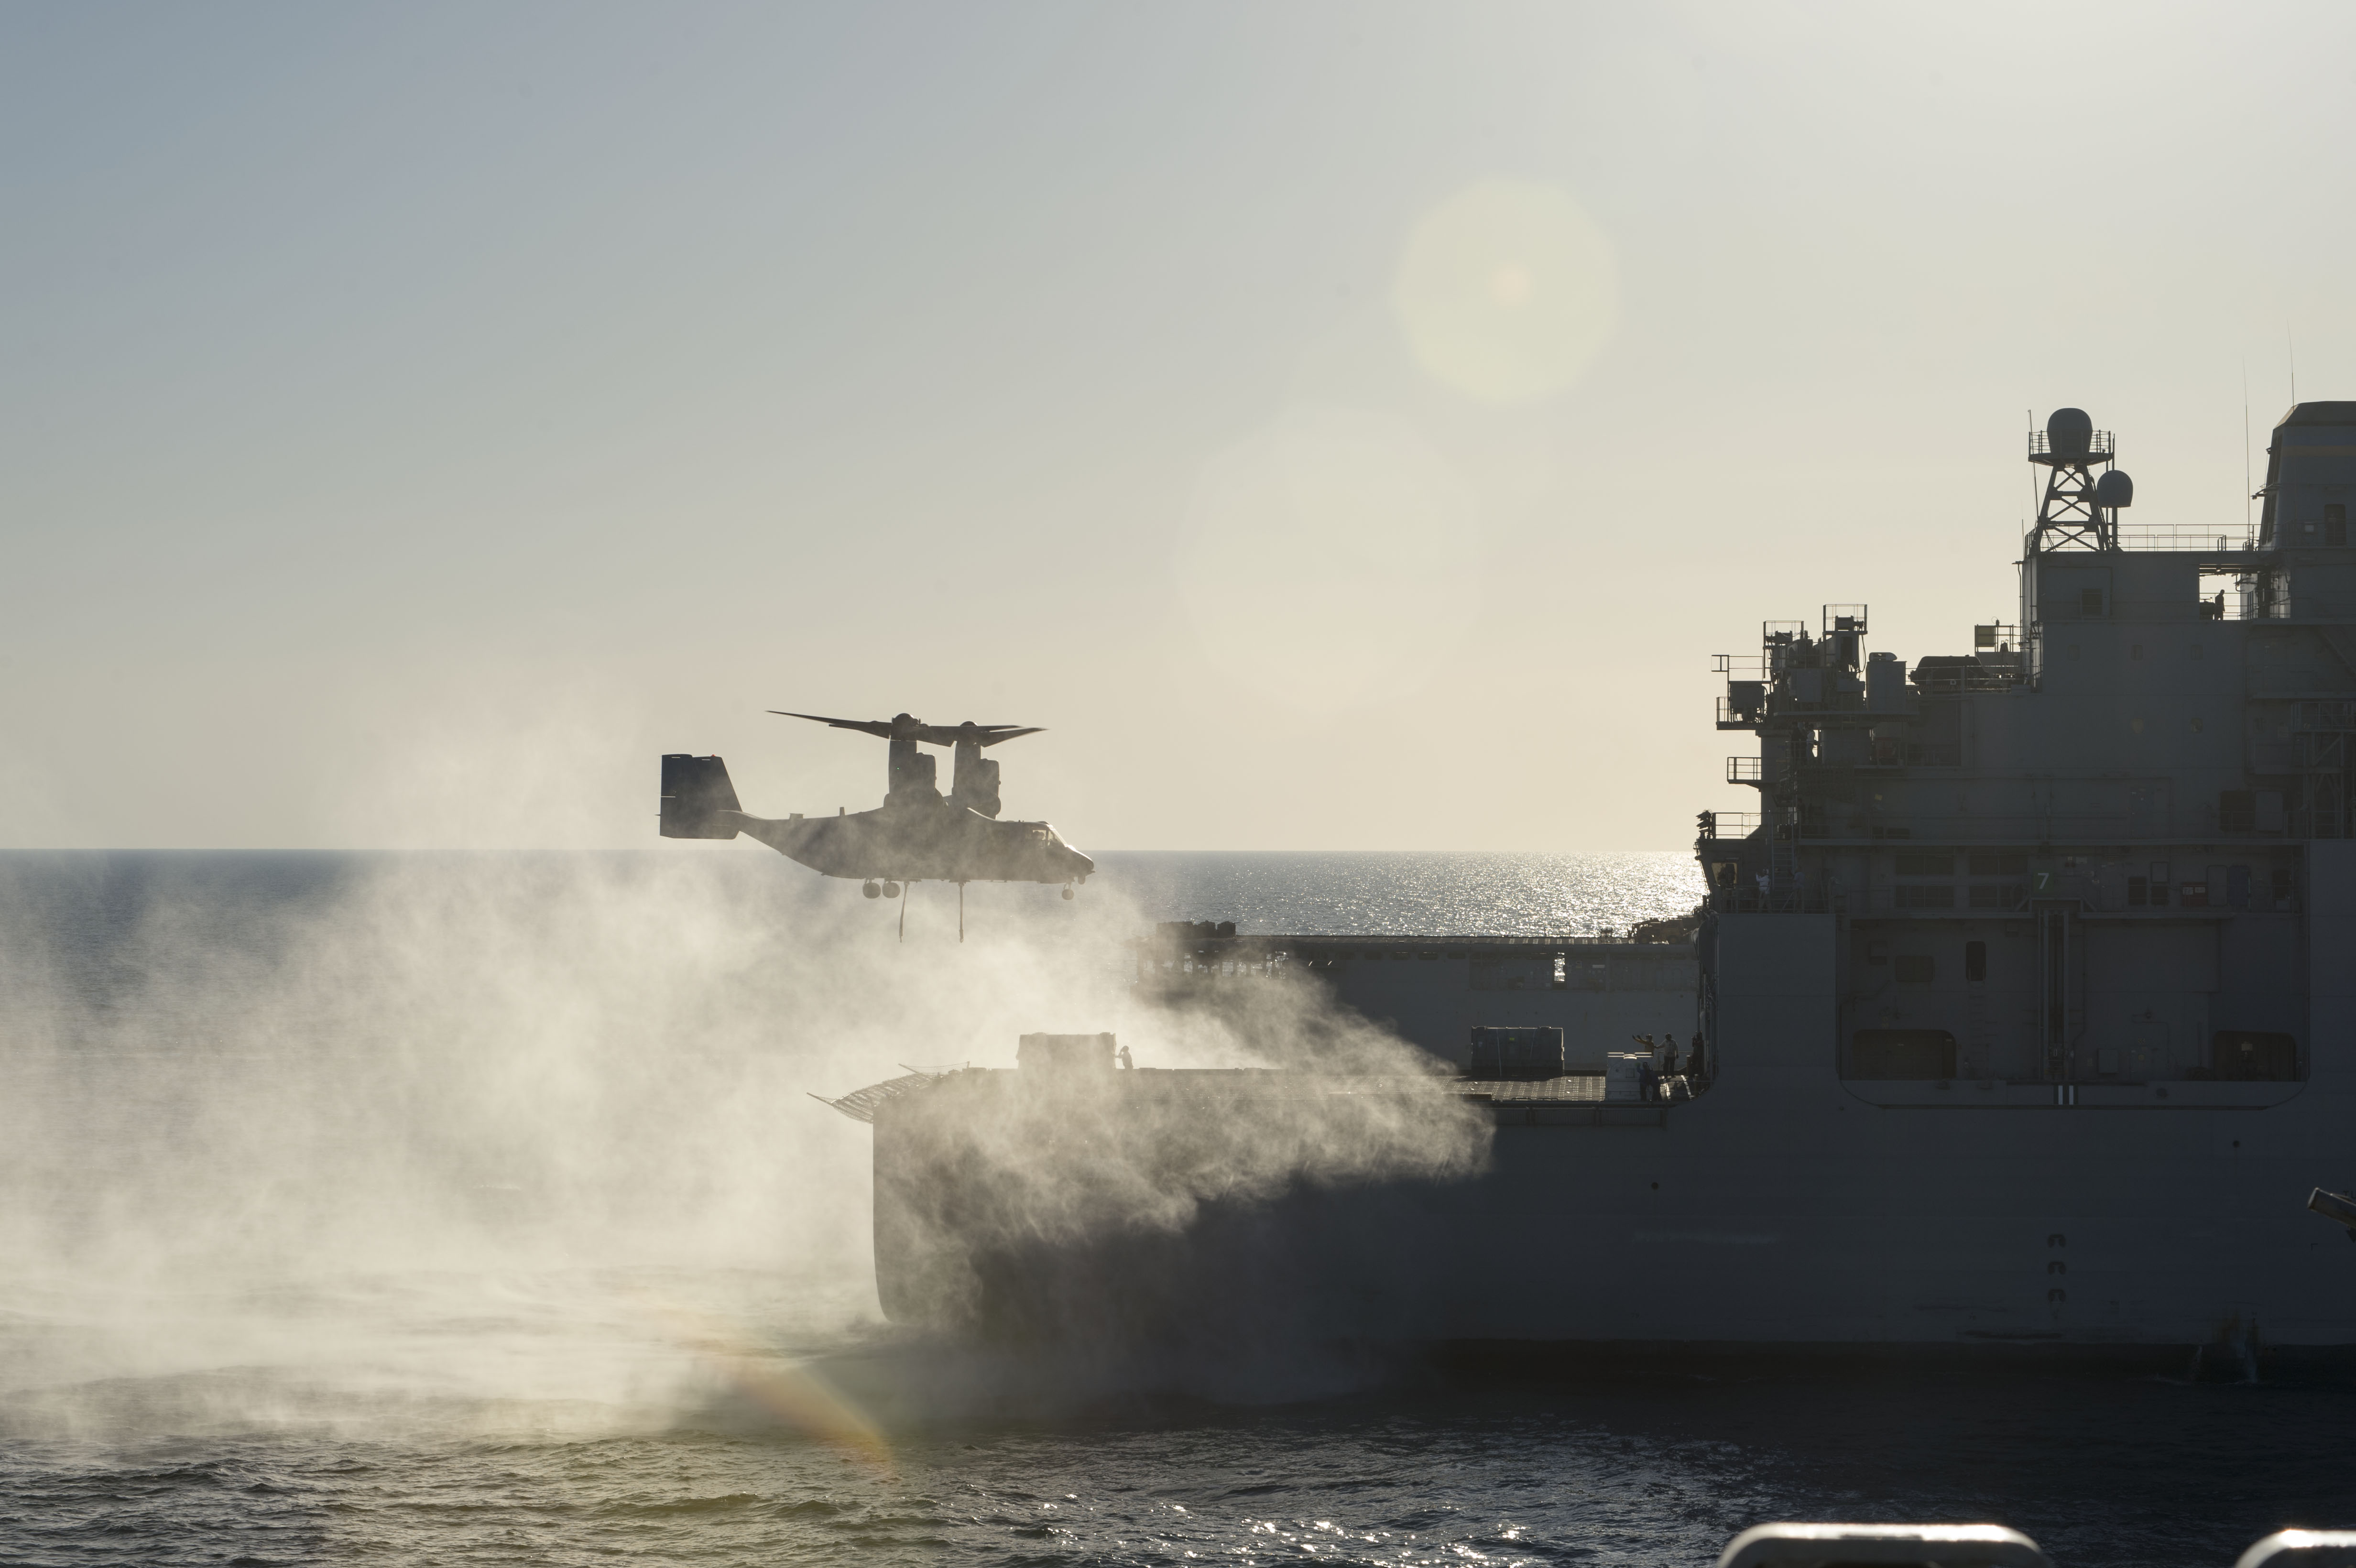 An MV-22 Osprey assigned to Marine Medium Tiltrotor Squadron (VMM) 163, Reinforced, approaches the Military Sealift Command dry cargo and ammunition ship USNS Robert E. Peary (T-AKE 5) to transport an AV-8B Harrier jet engine to the amphibious assault ship USS Makin Island (LHD 8) during a replenishment-at-sea in October 2014. US Navy photo.